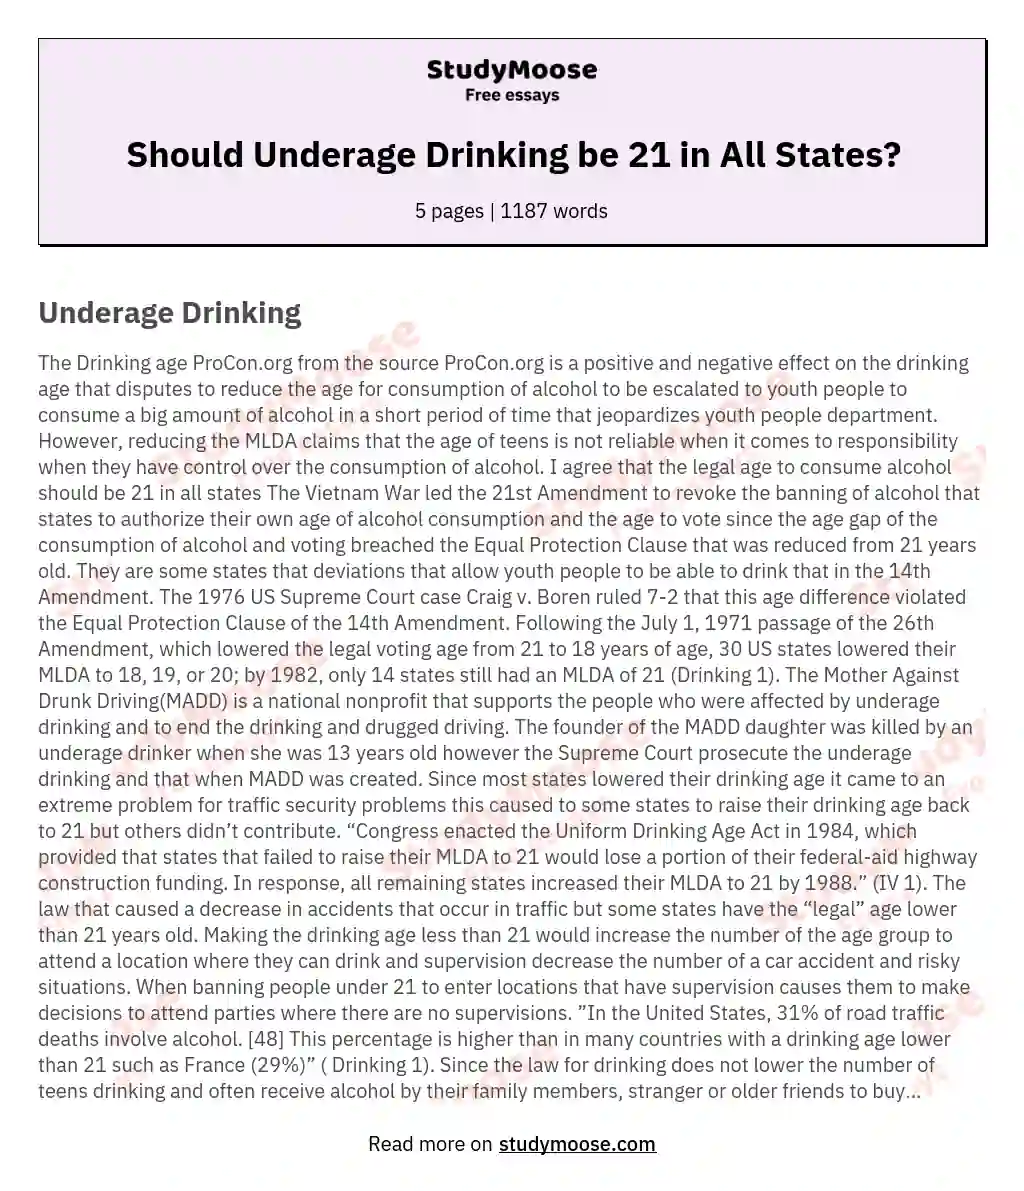 Should Underage Drinking be 21 in All States?